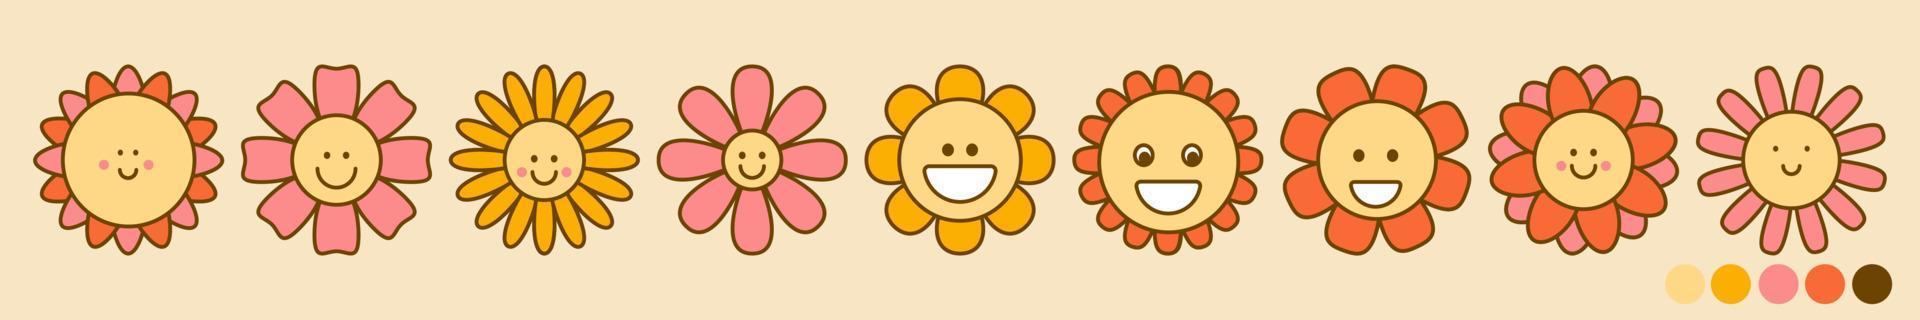 Vector set of retro flowers witn smiles and eyes in Groovy style